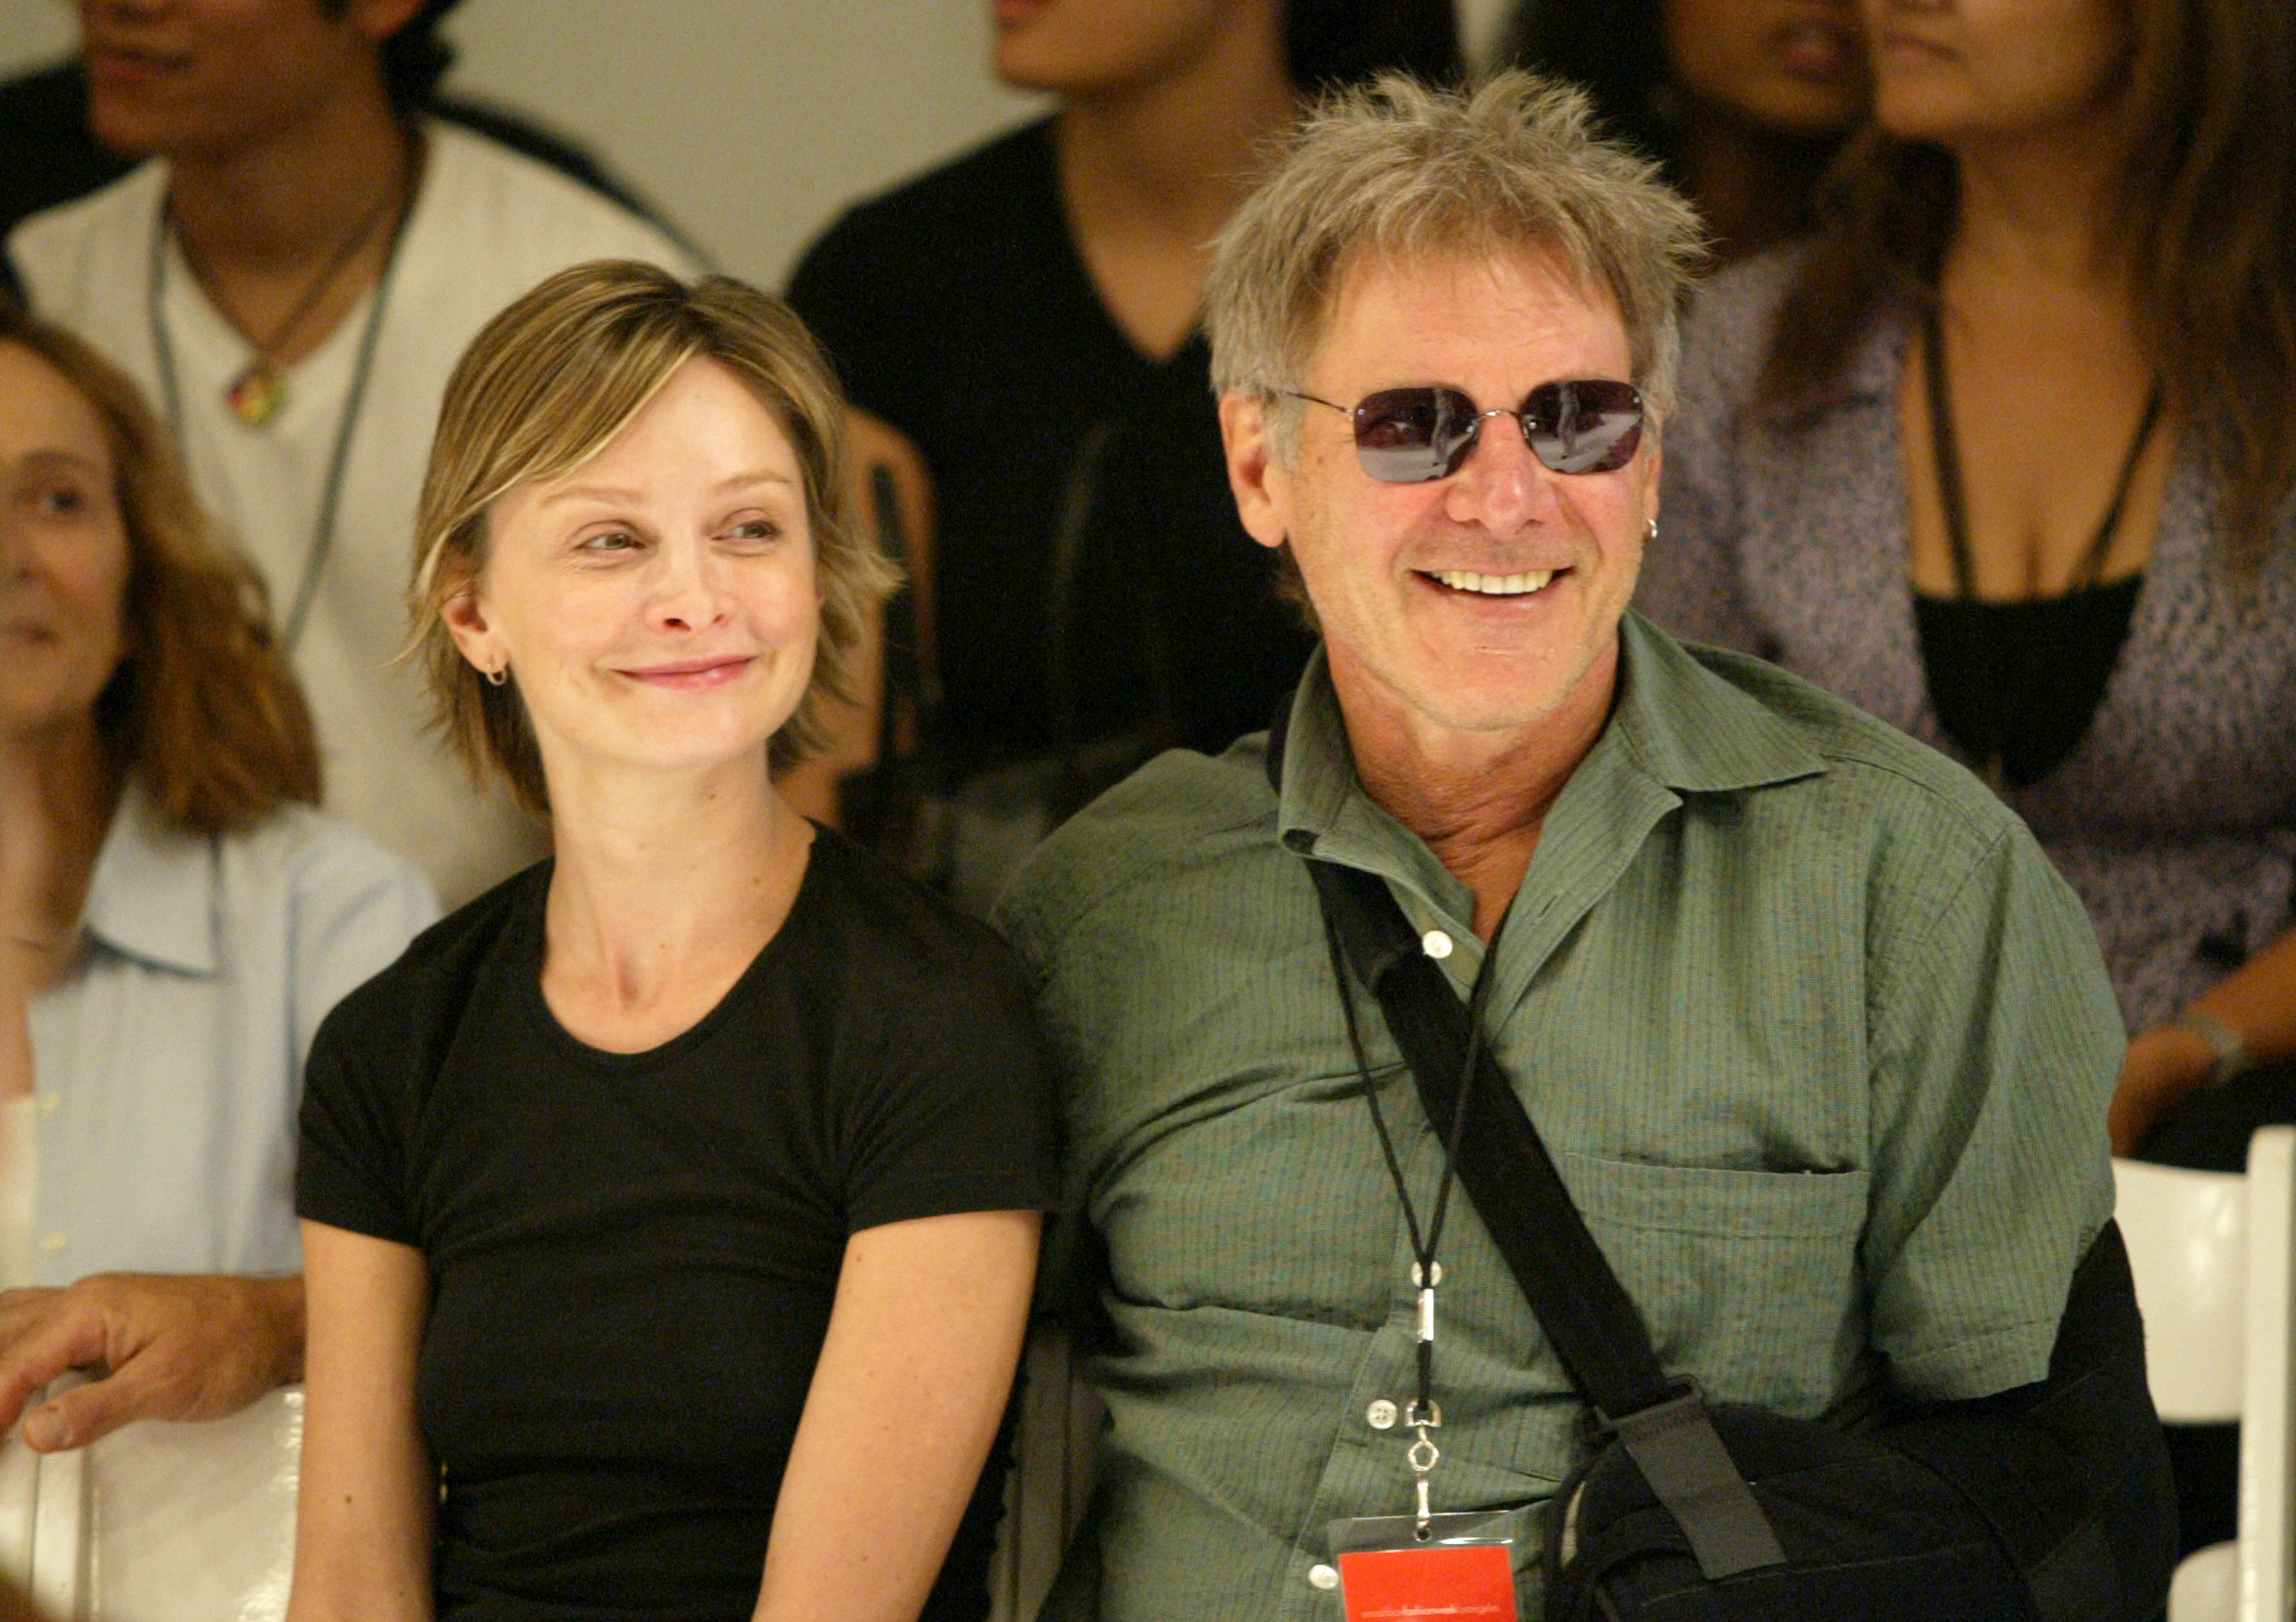 Harrison Ford and Calista Flockhart at the 2003 Smashbox Fashion Week in Los Angeles | Source: Getty Images